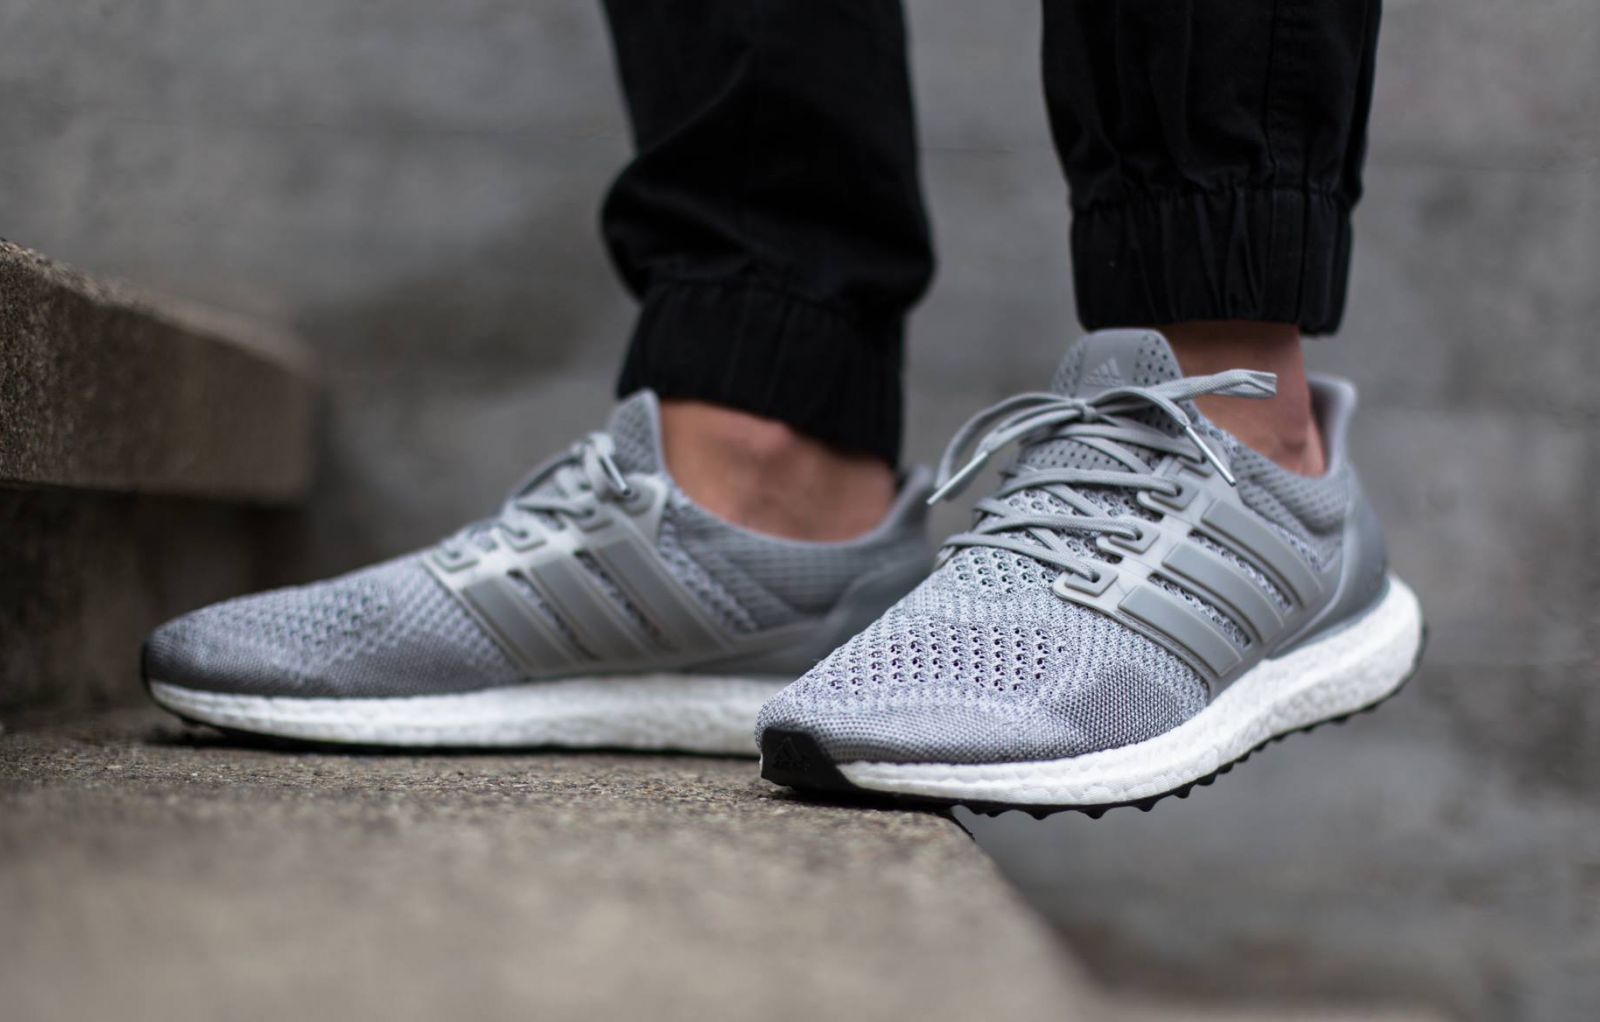 See How the 'Metallic Silver' adidas 